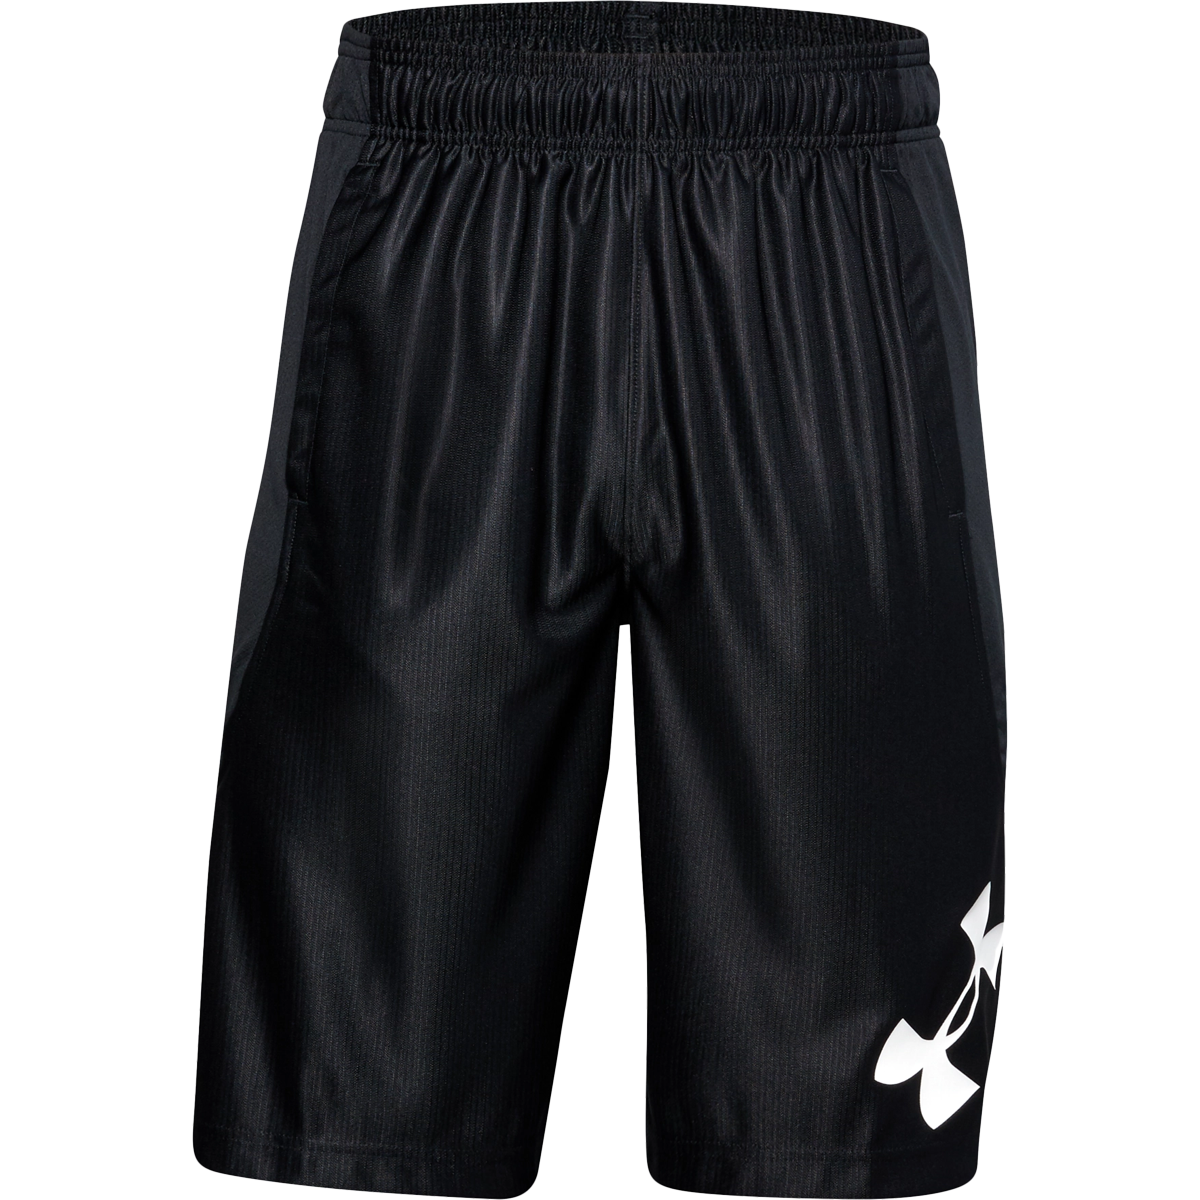 Men's Tall Mesh Basketball Shorts With Tape